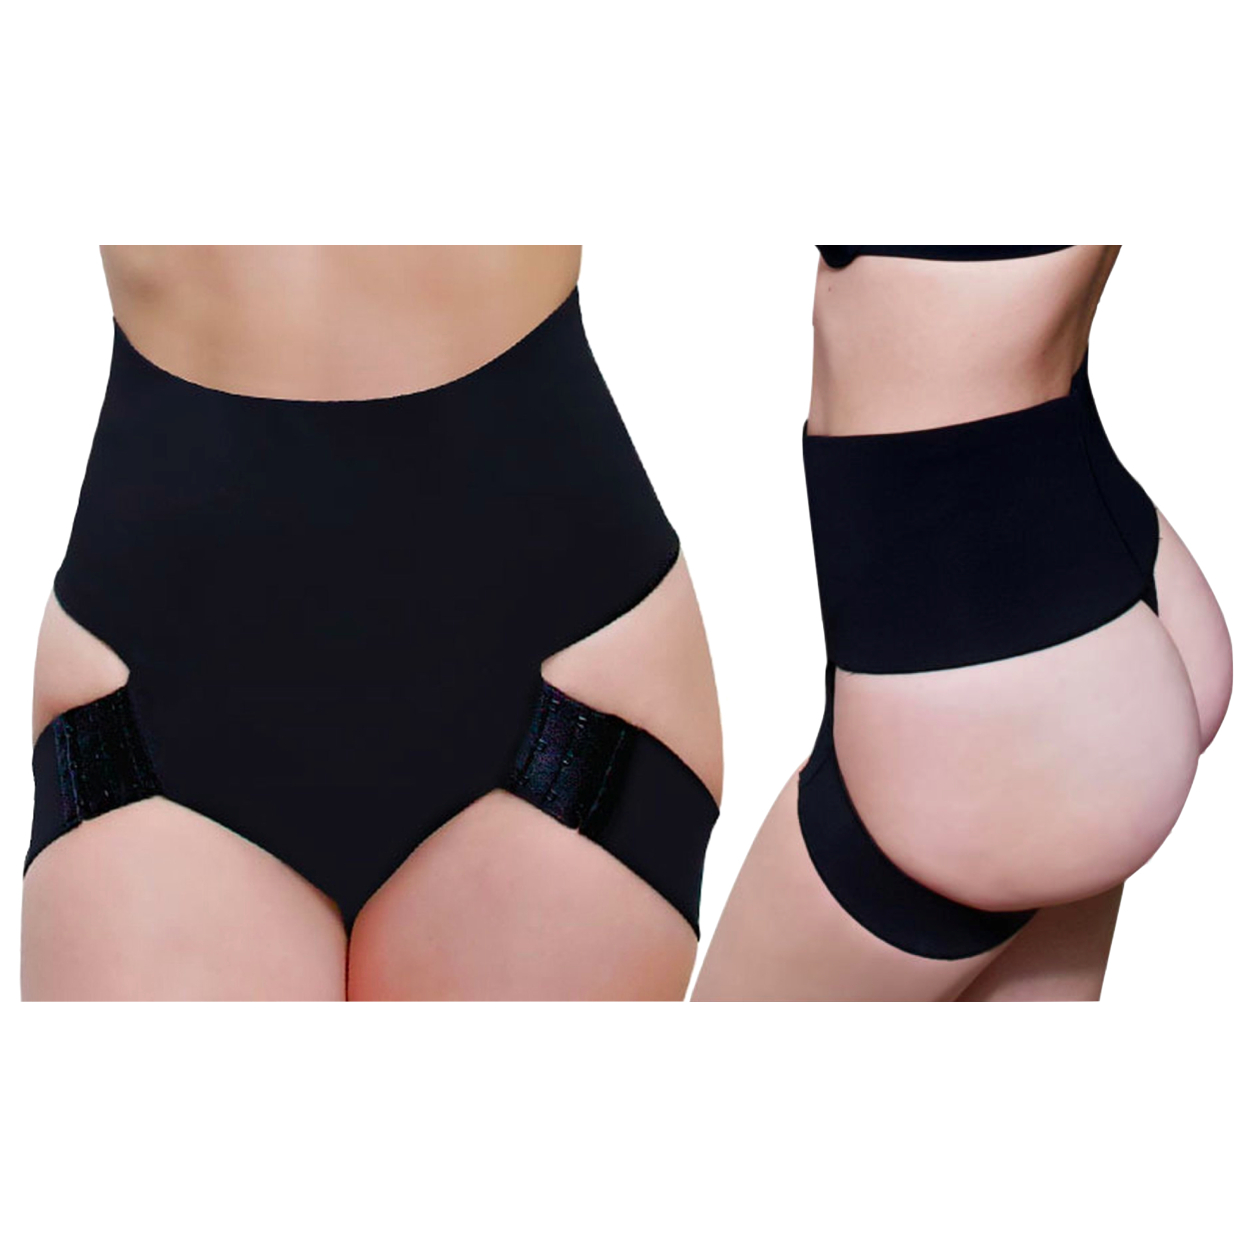 Adjustable Butt Booster Control Shaper In Regular And Plus Sizes - Black, 5X